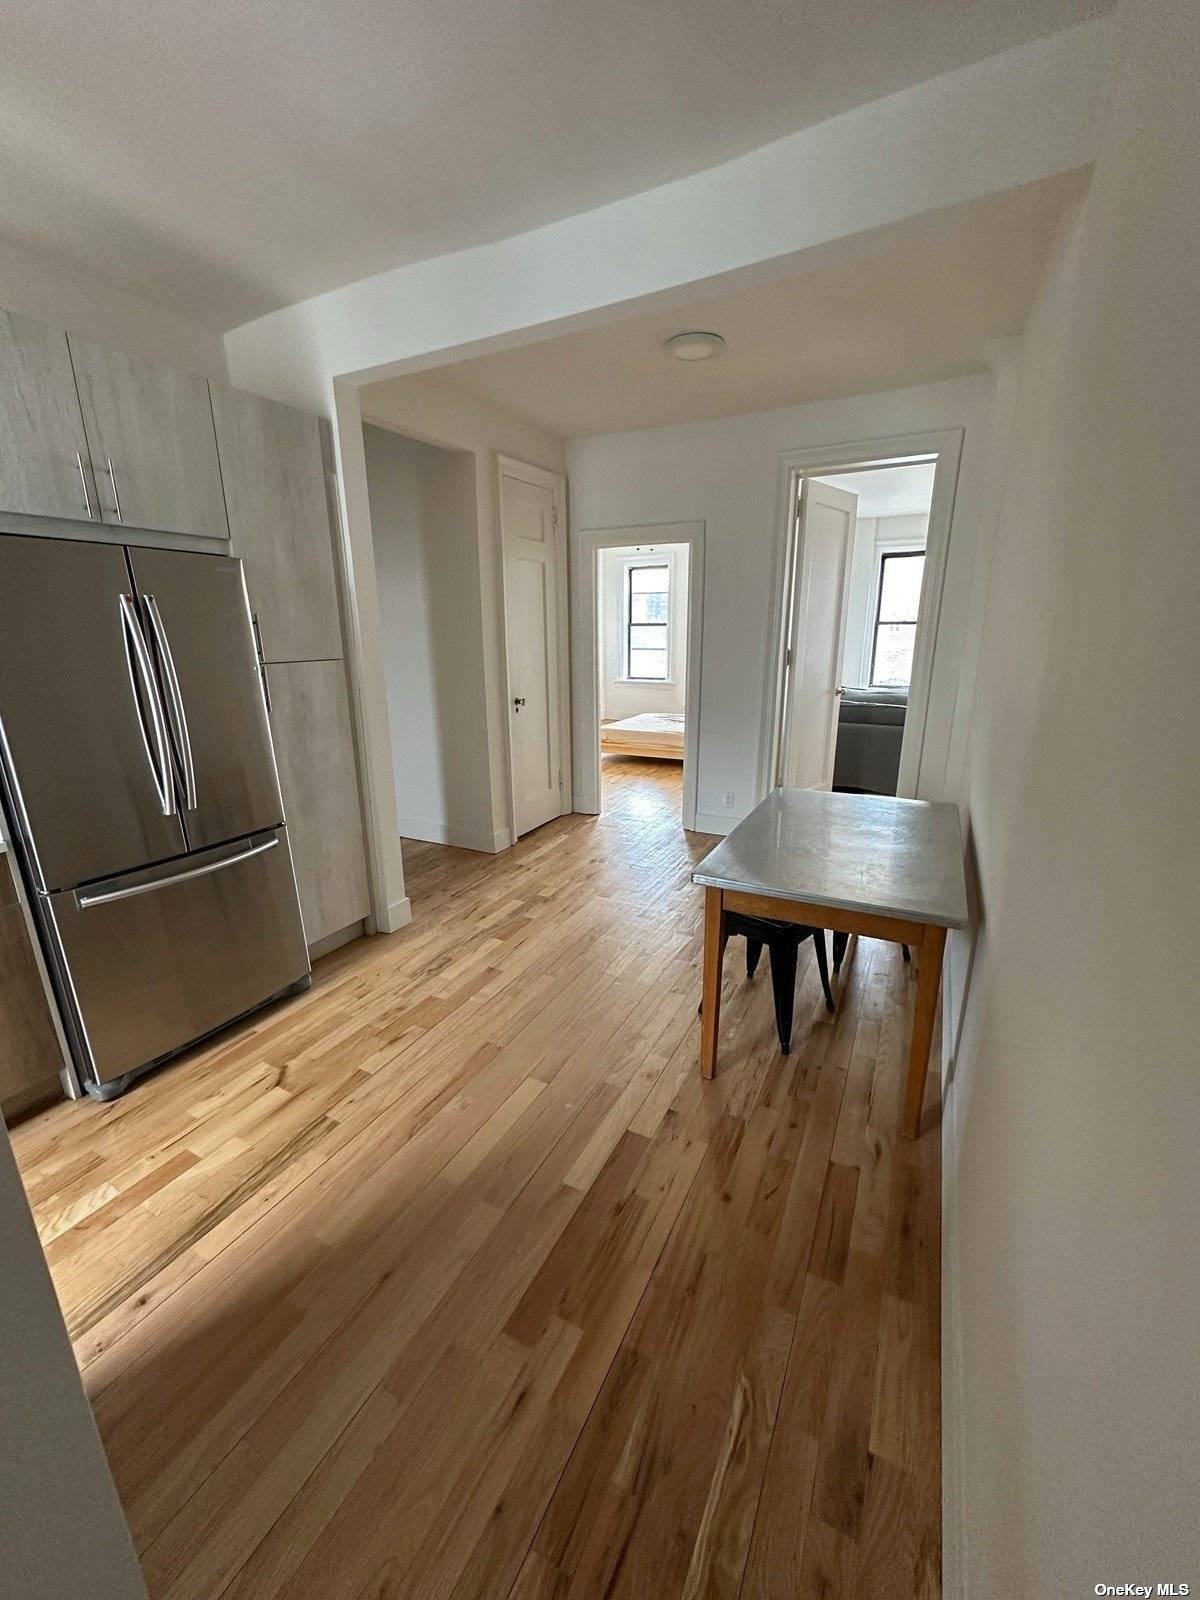 This pre war building with a large one bedroom boasts a newly renovated kitchen, a spacious living room, and additional locked basement storage.